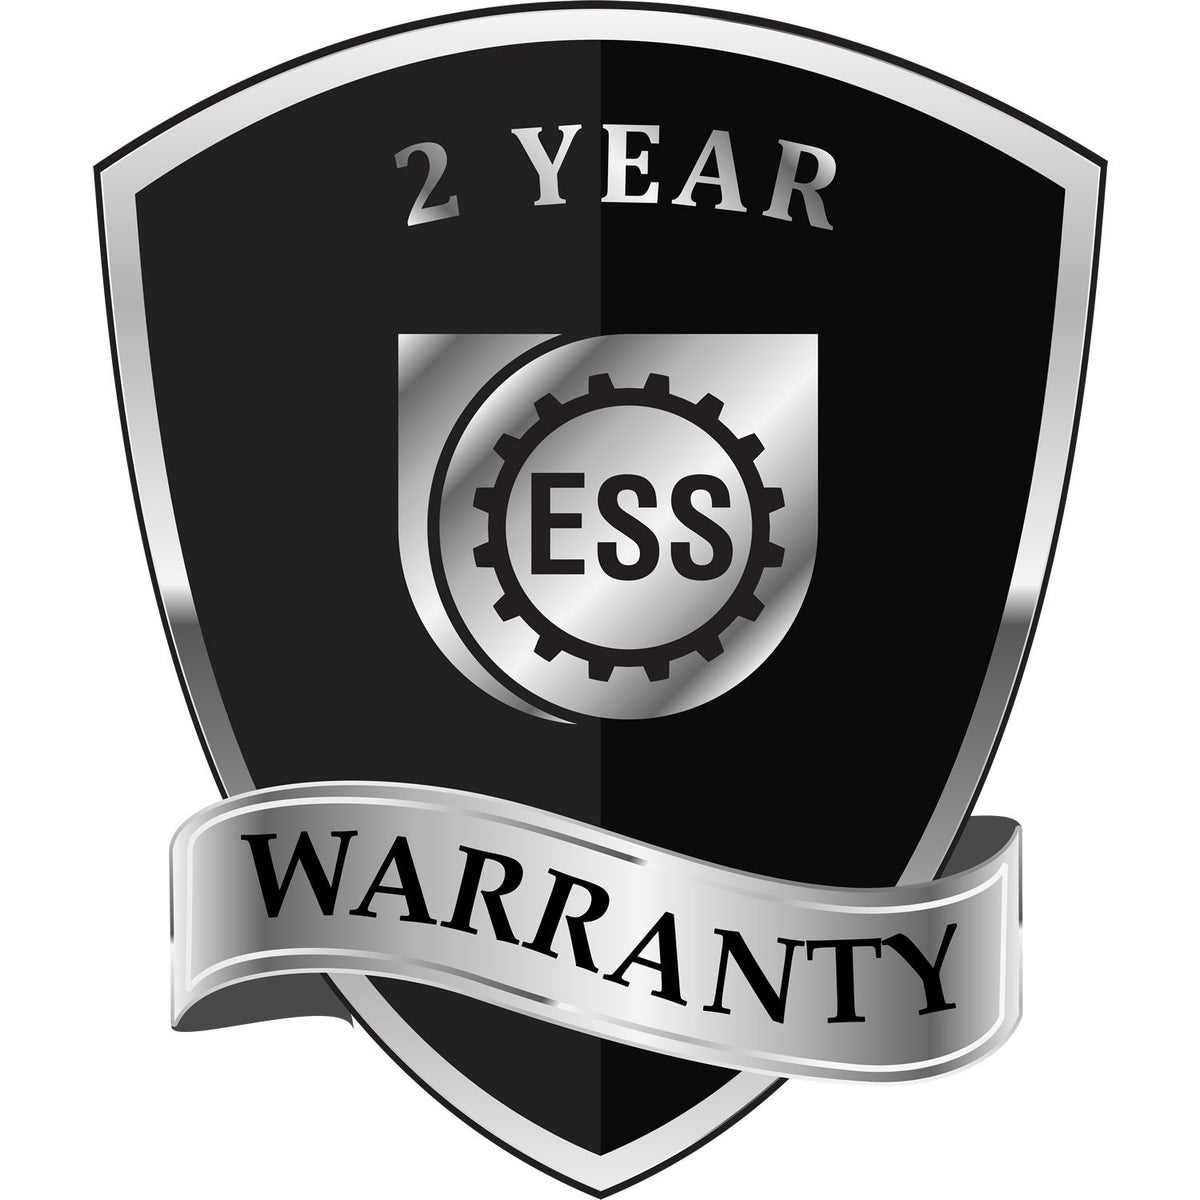 A black and silver badge or emblem showing warranty information for the Gift Guam Engineer Seal